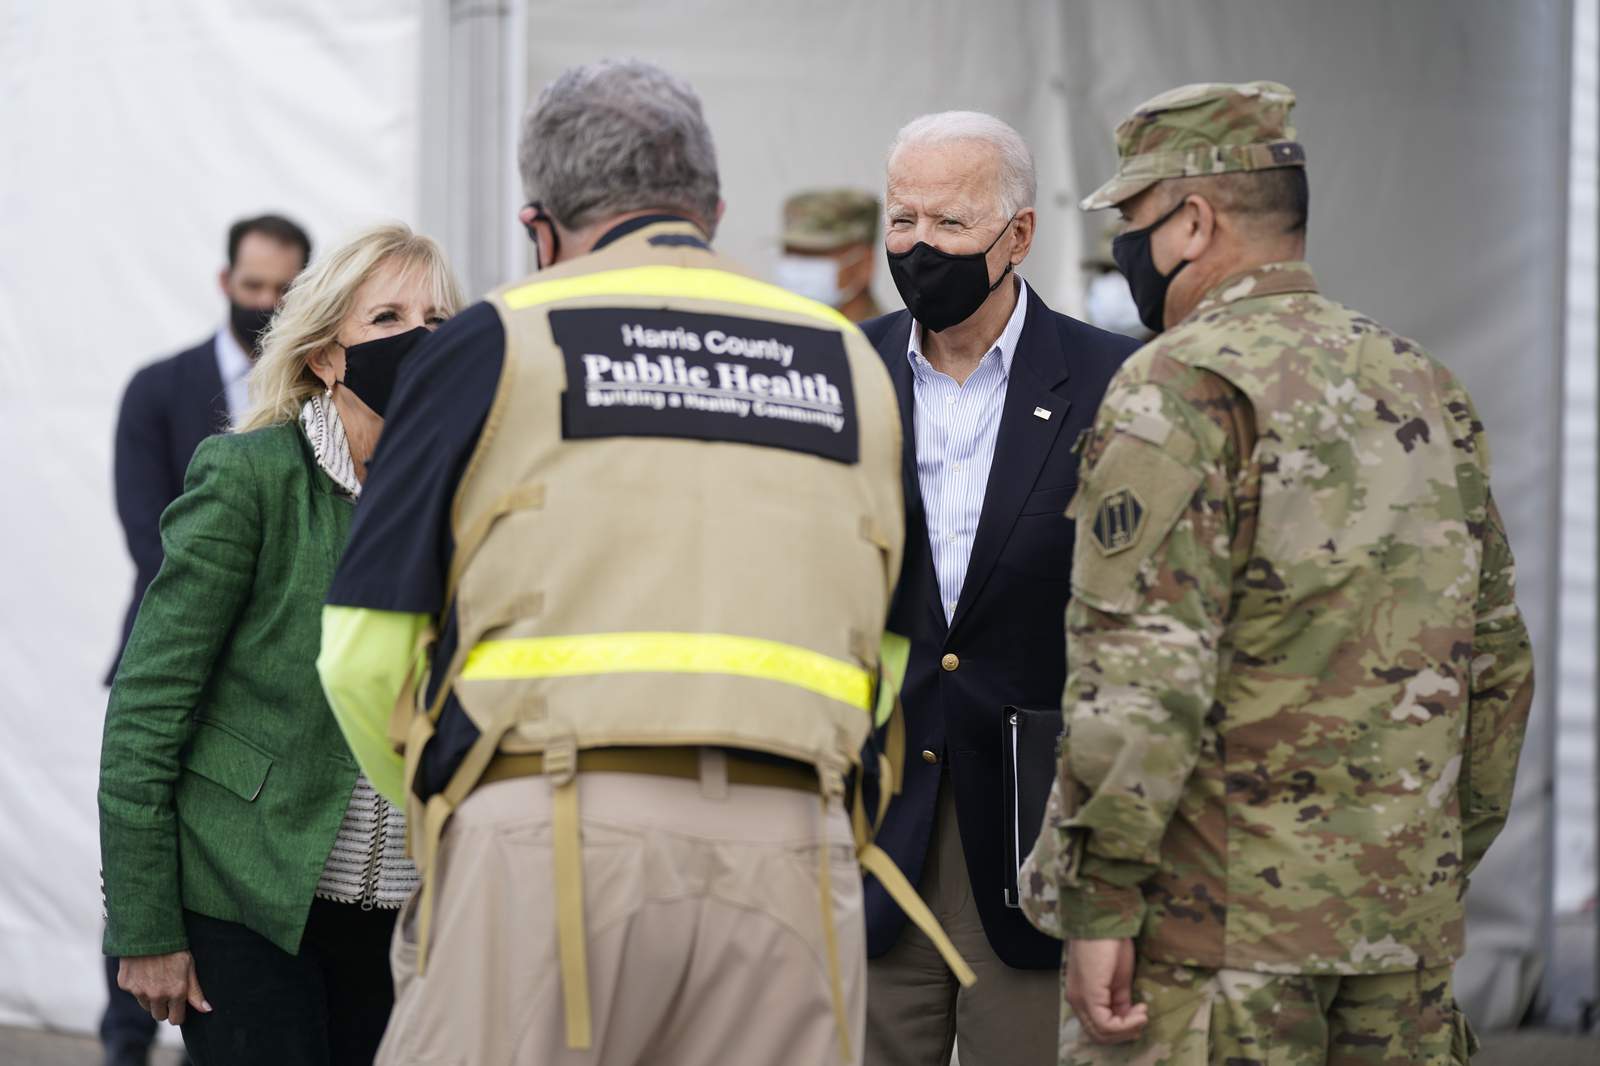 President Biden to exercise empathy skills in Texas visit after storms